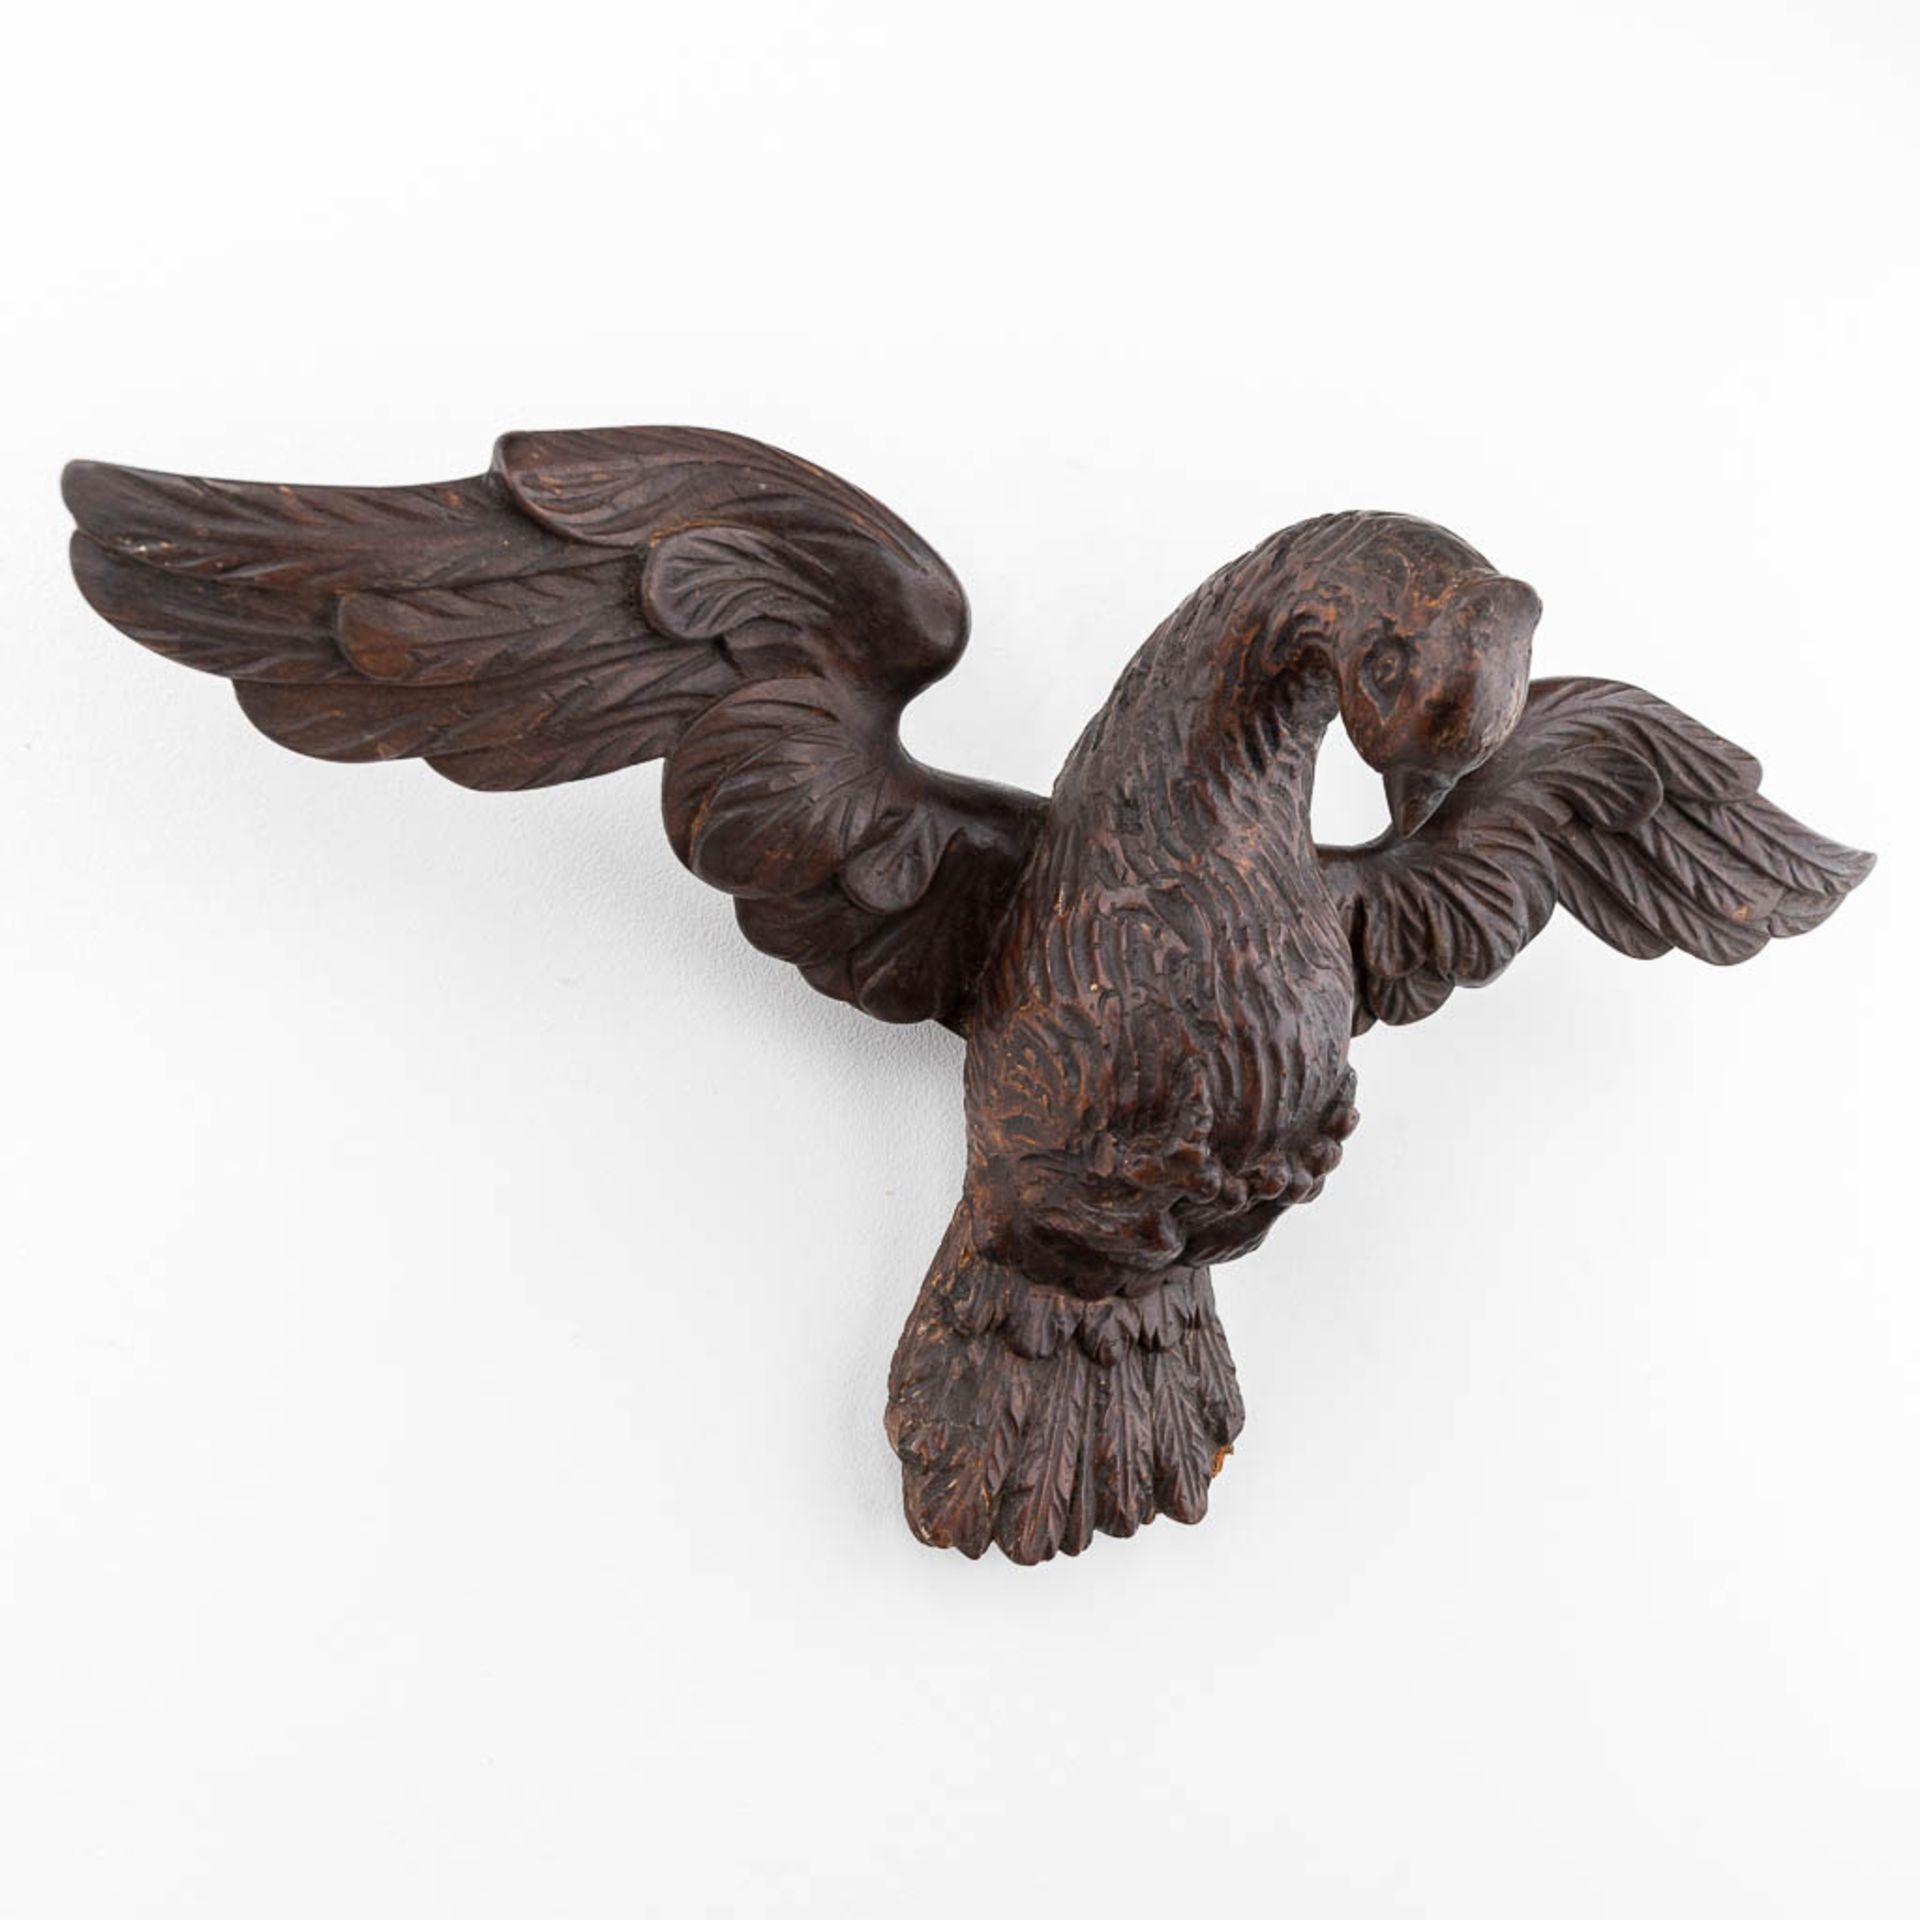 A wood-sculptured dove of peace, 19th century. (L: 12 x W: 45 x H: 25 cm) - Image 4 of 11